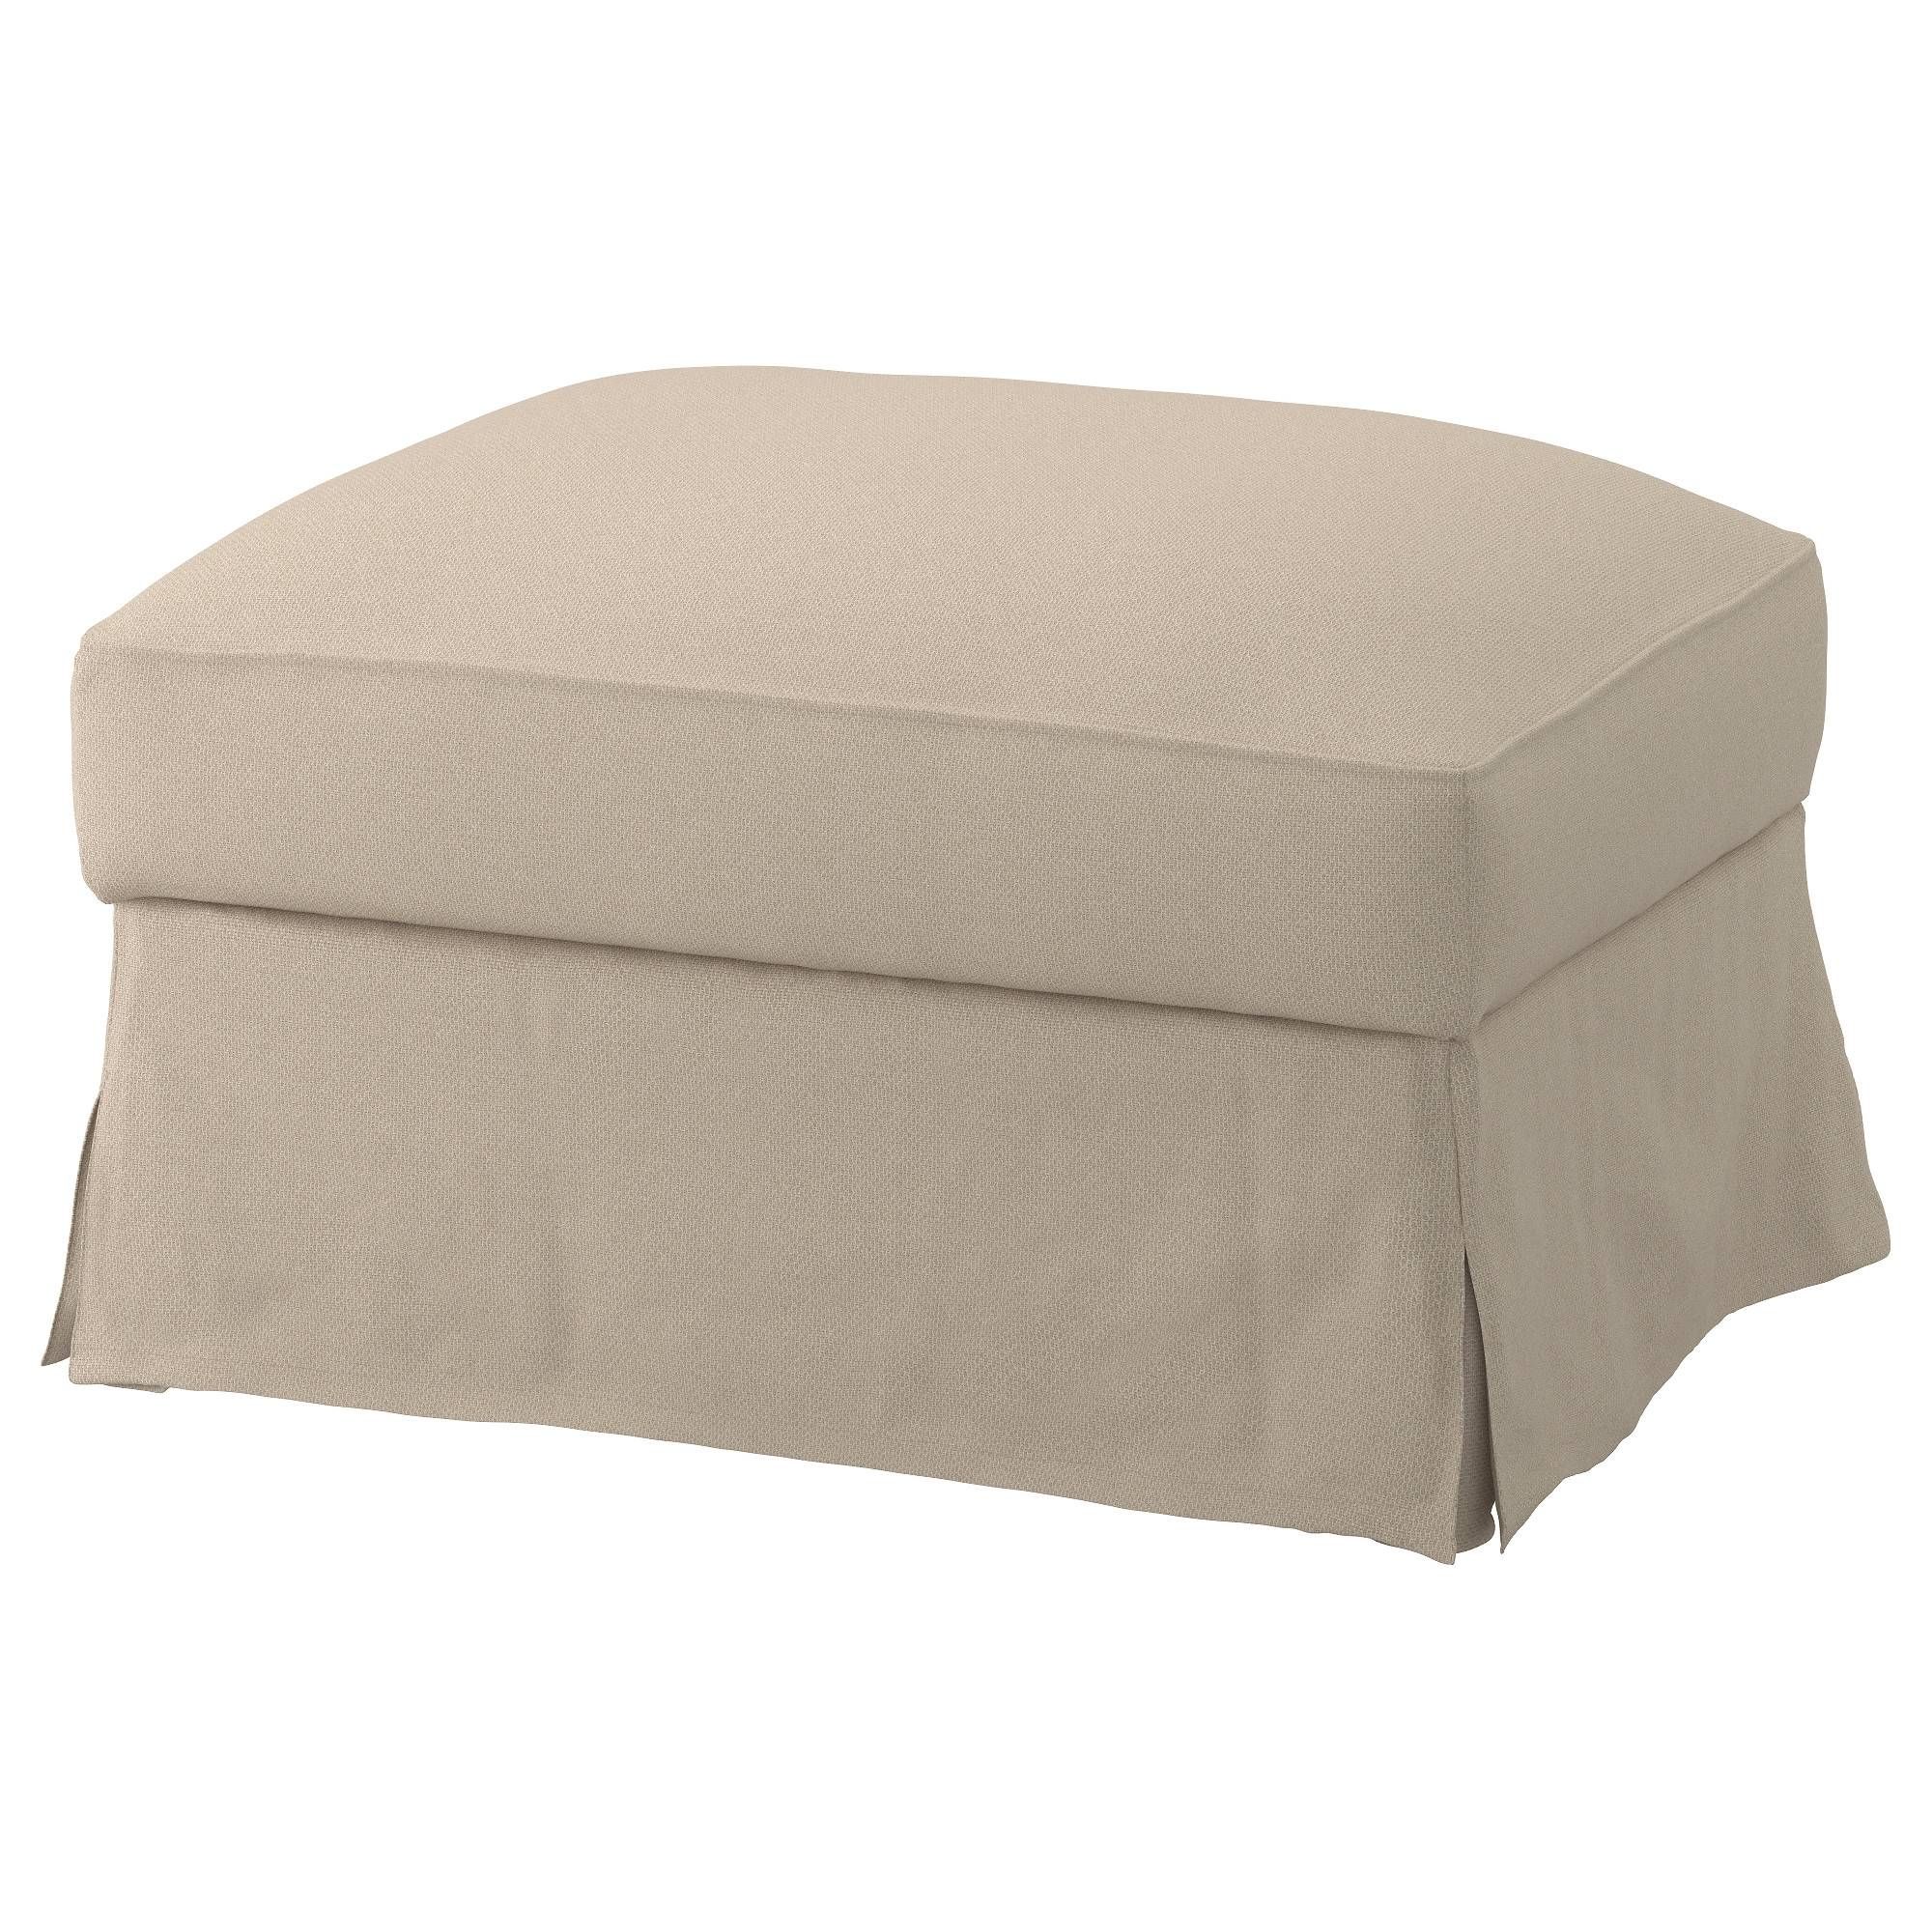 Färlöv Footstool With Storage Flodafors Beige – Ikea Throughout Footstools And Pouffes (Photo 9 of 30)